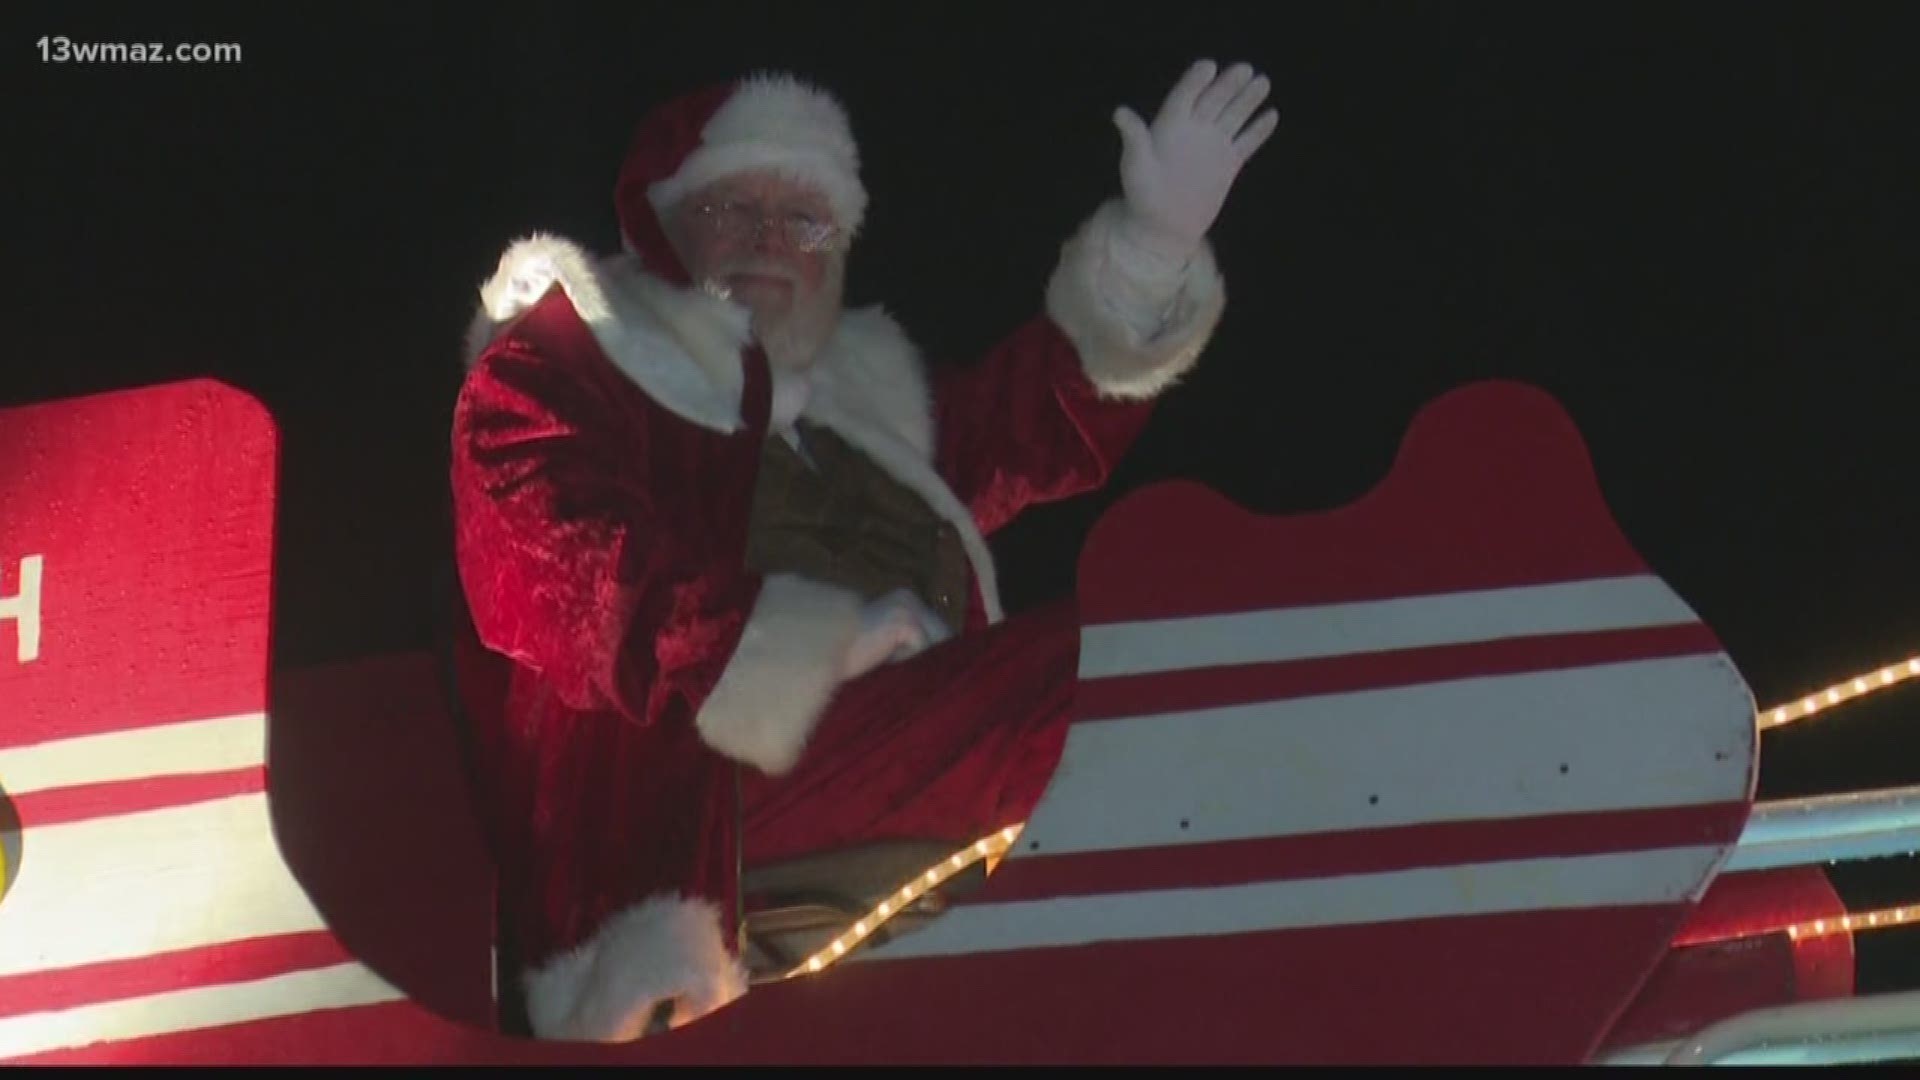 Jones County gets together for annual Christmas parade